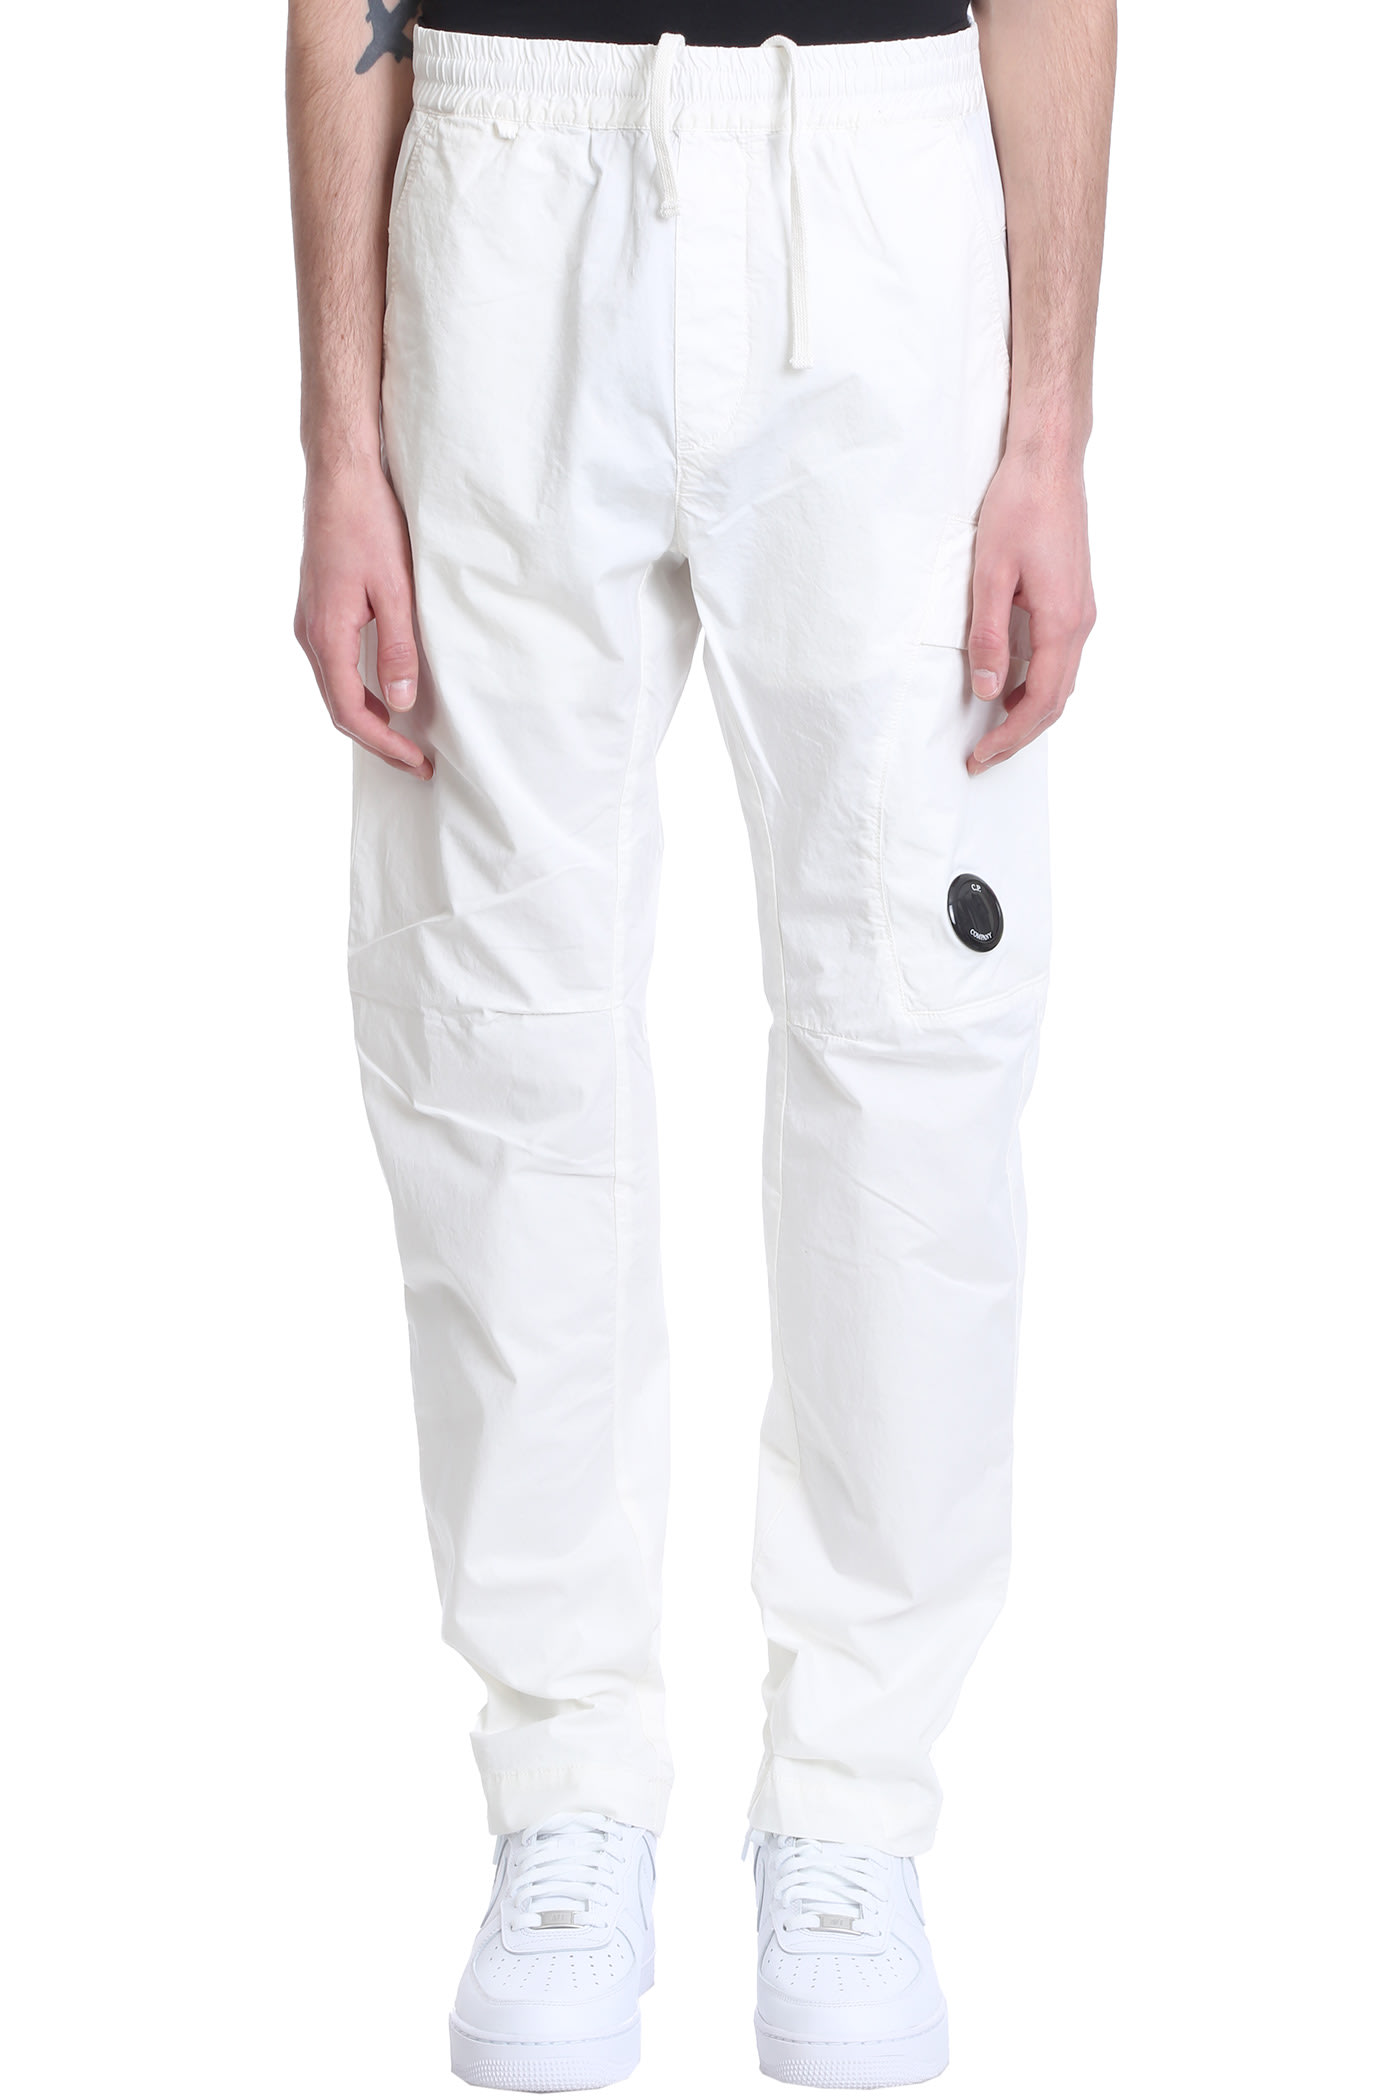 C.P. Company Pants In White Cotton